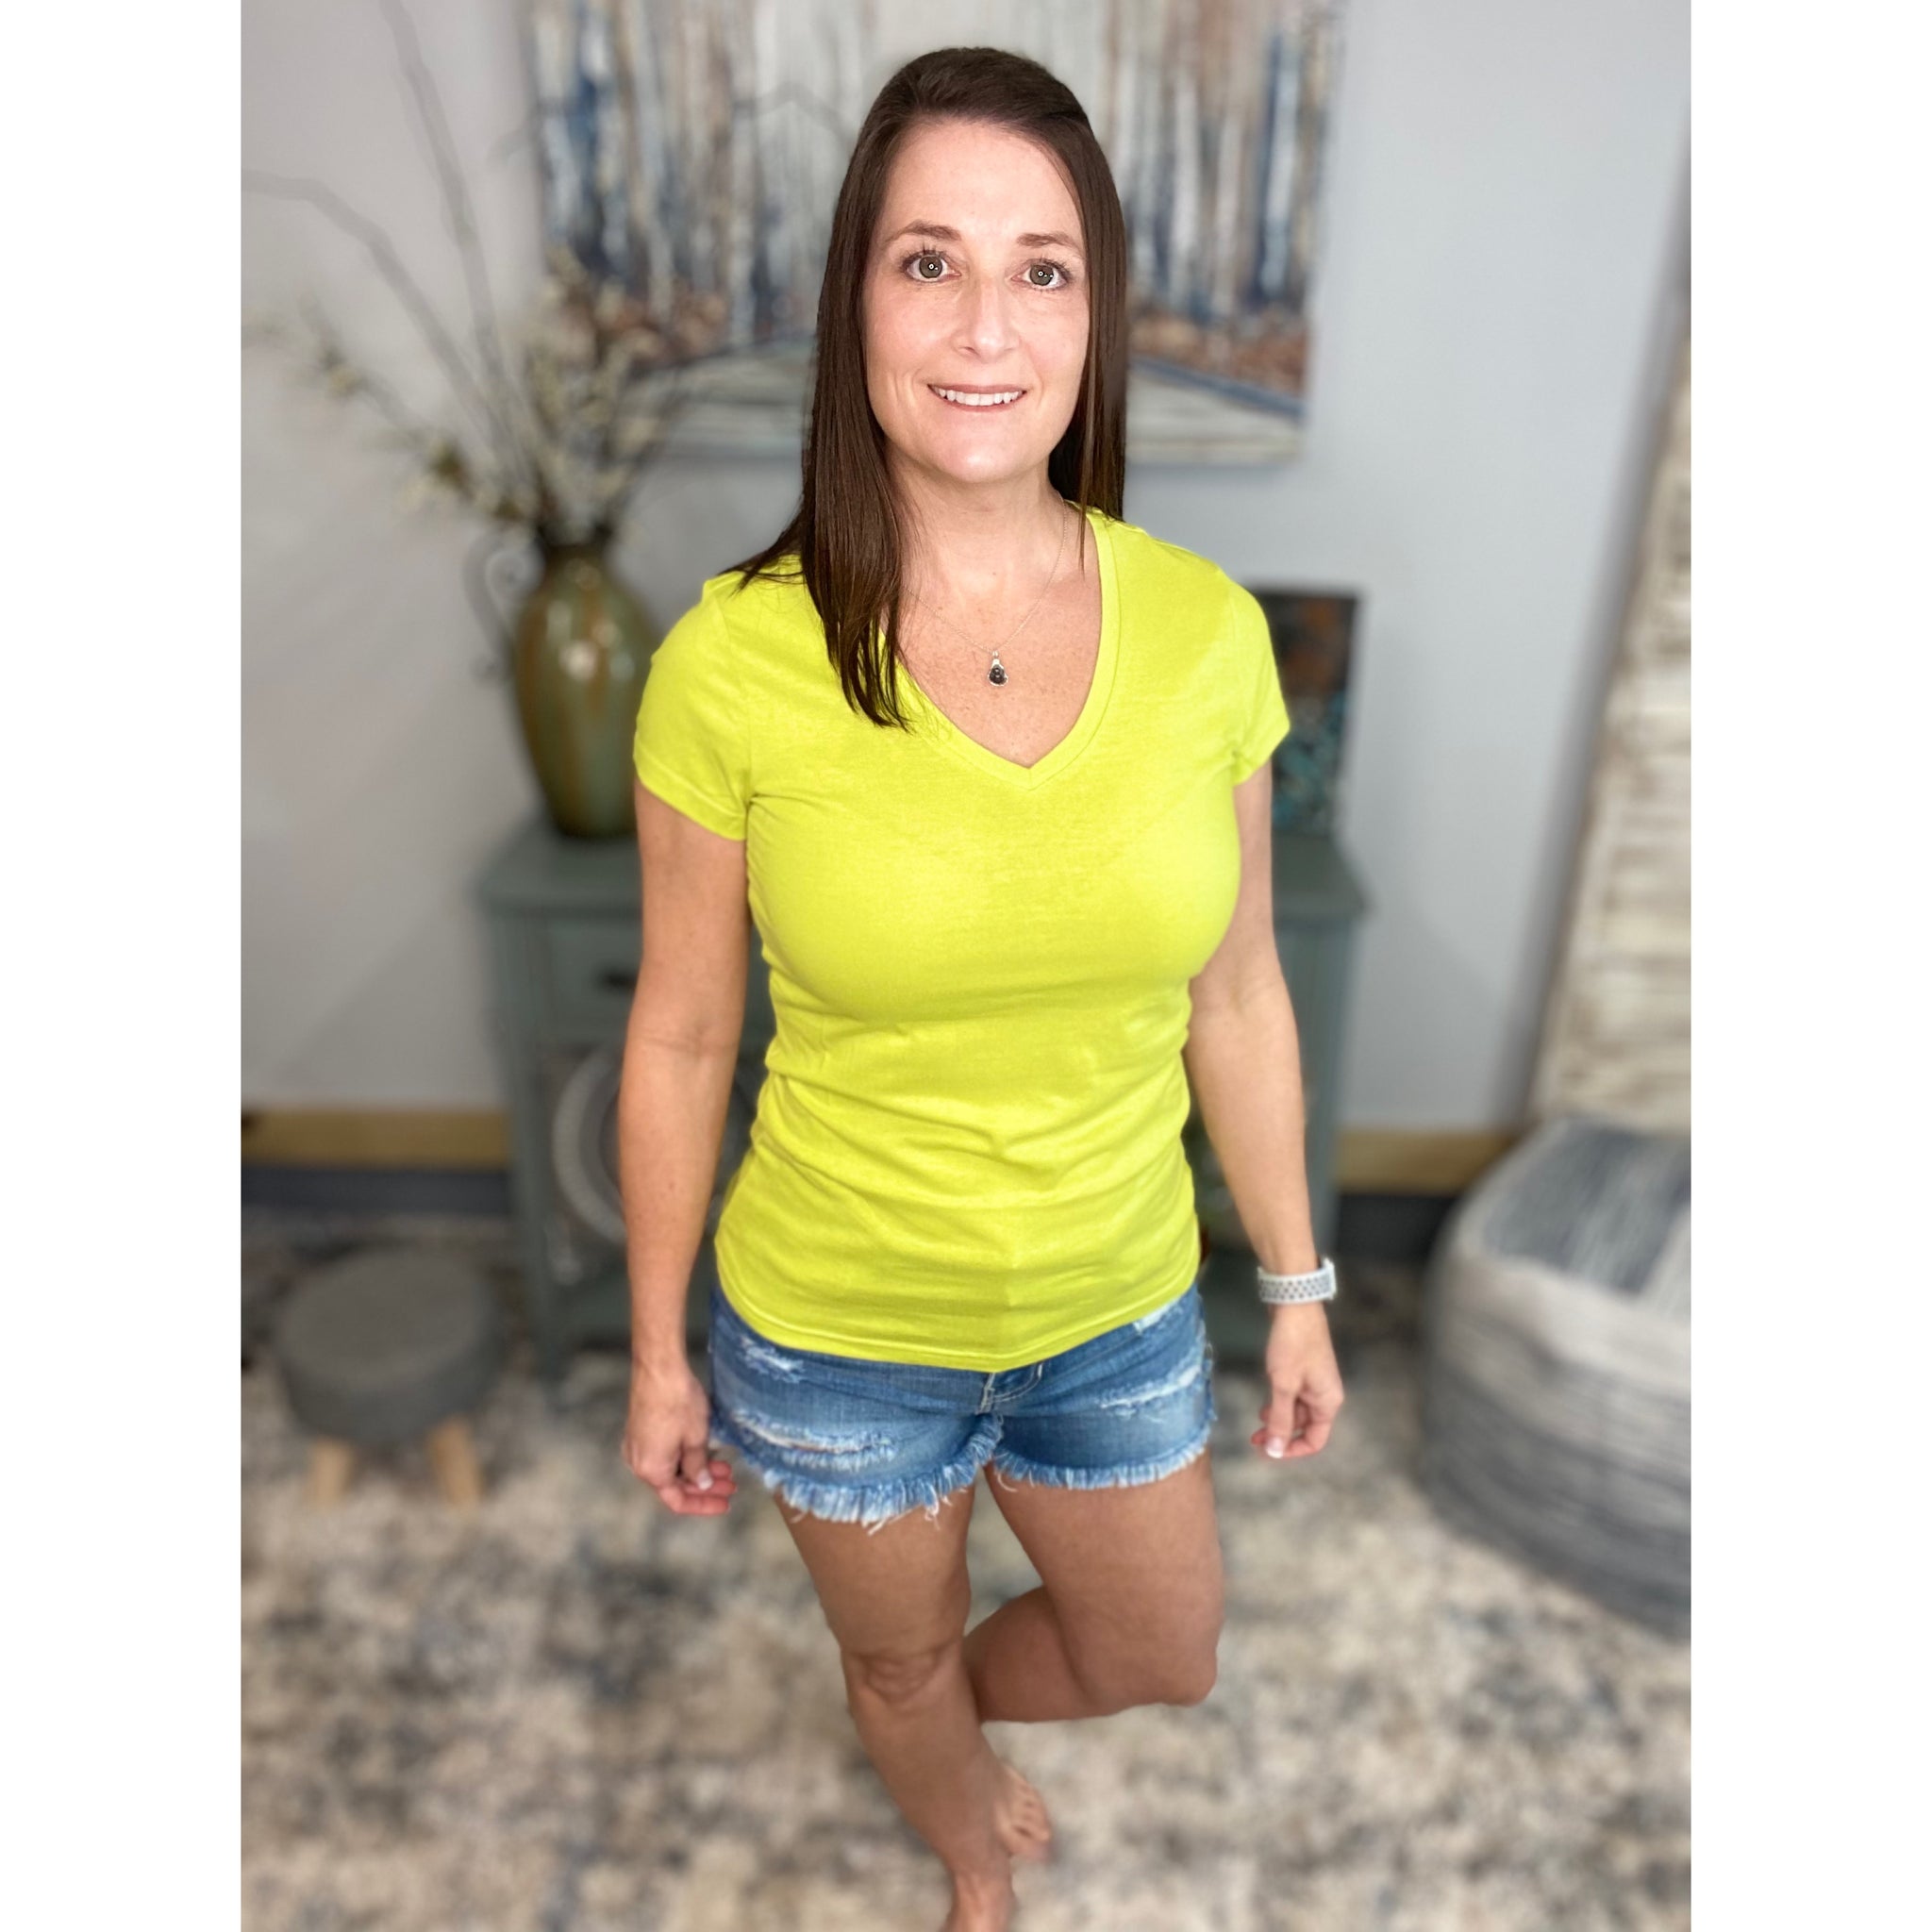 “Basic Babe” Low Cut V Neck Cleavage Baby Slimming Short Sleeve Basic Tee Neon Yellow